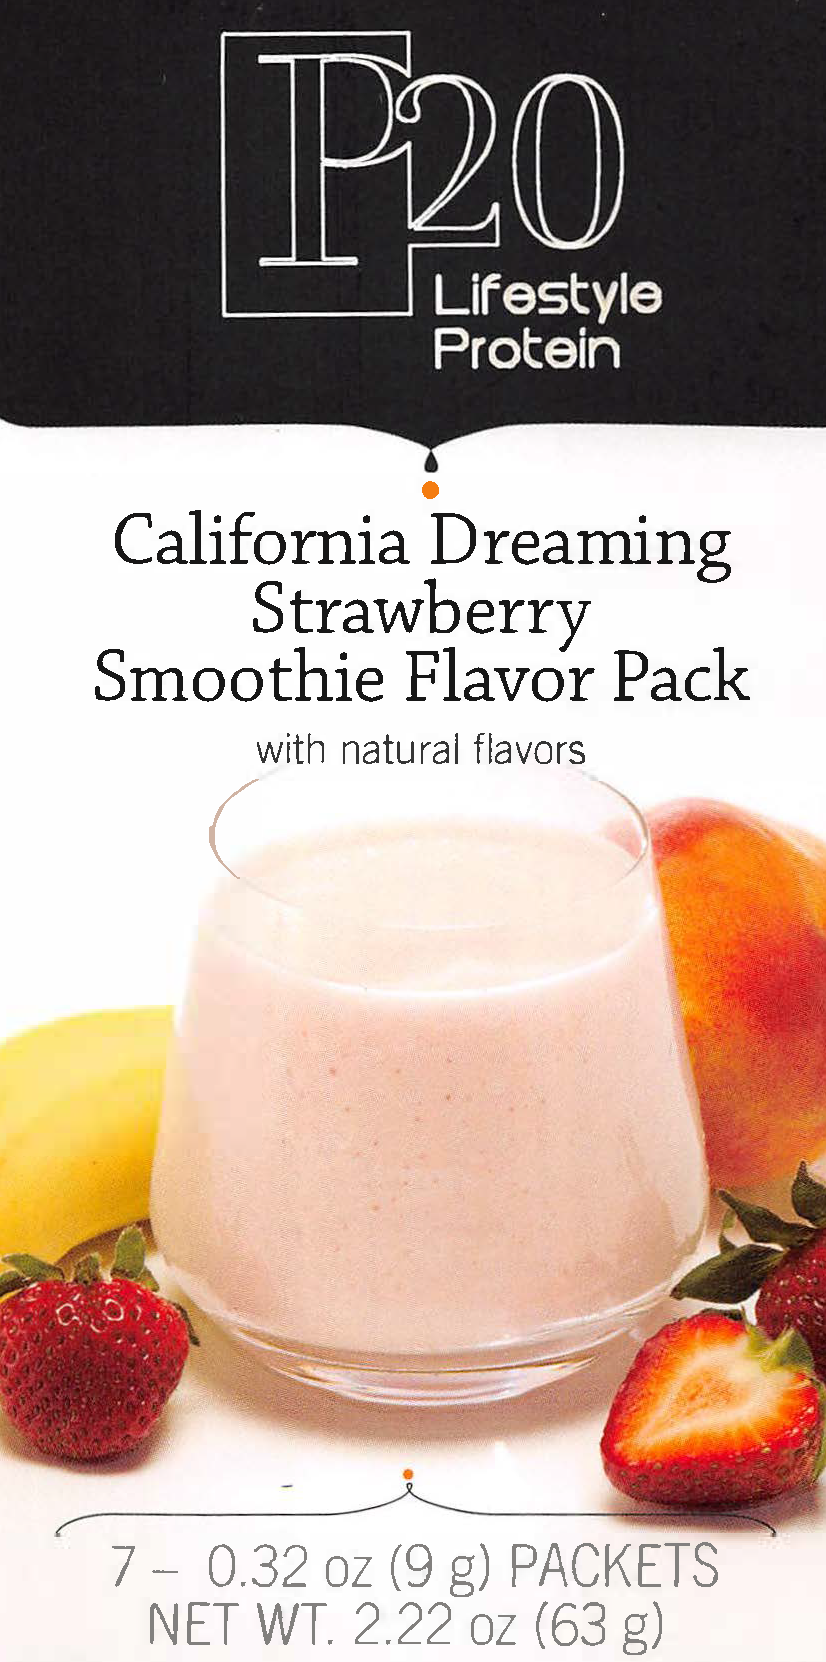 P20 Lifestyle Protein California Dreaming Strawberry VLC Smoothie Flavor Pack